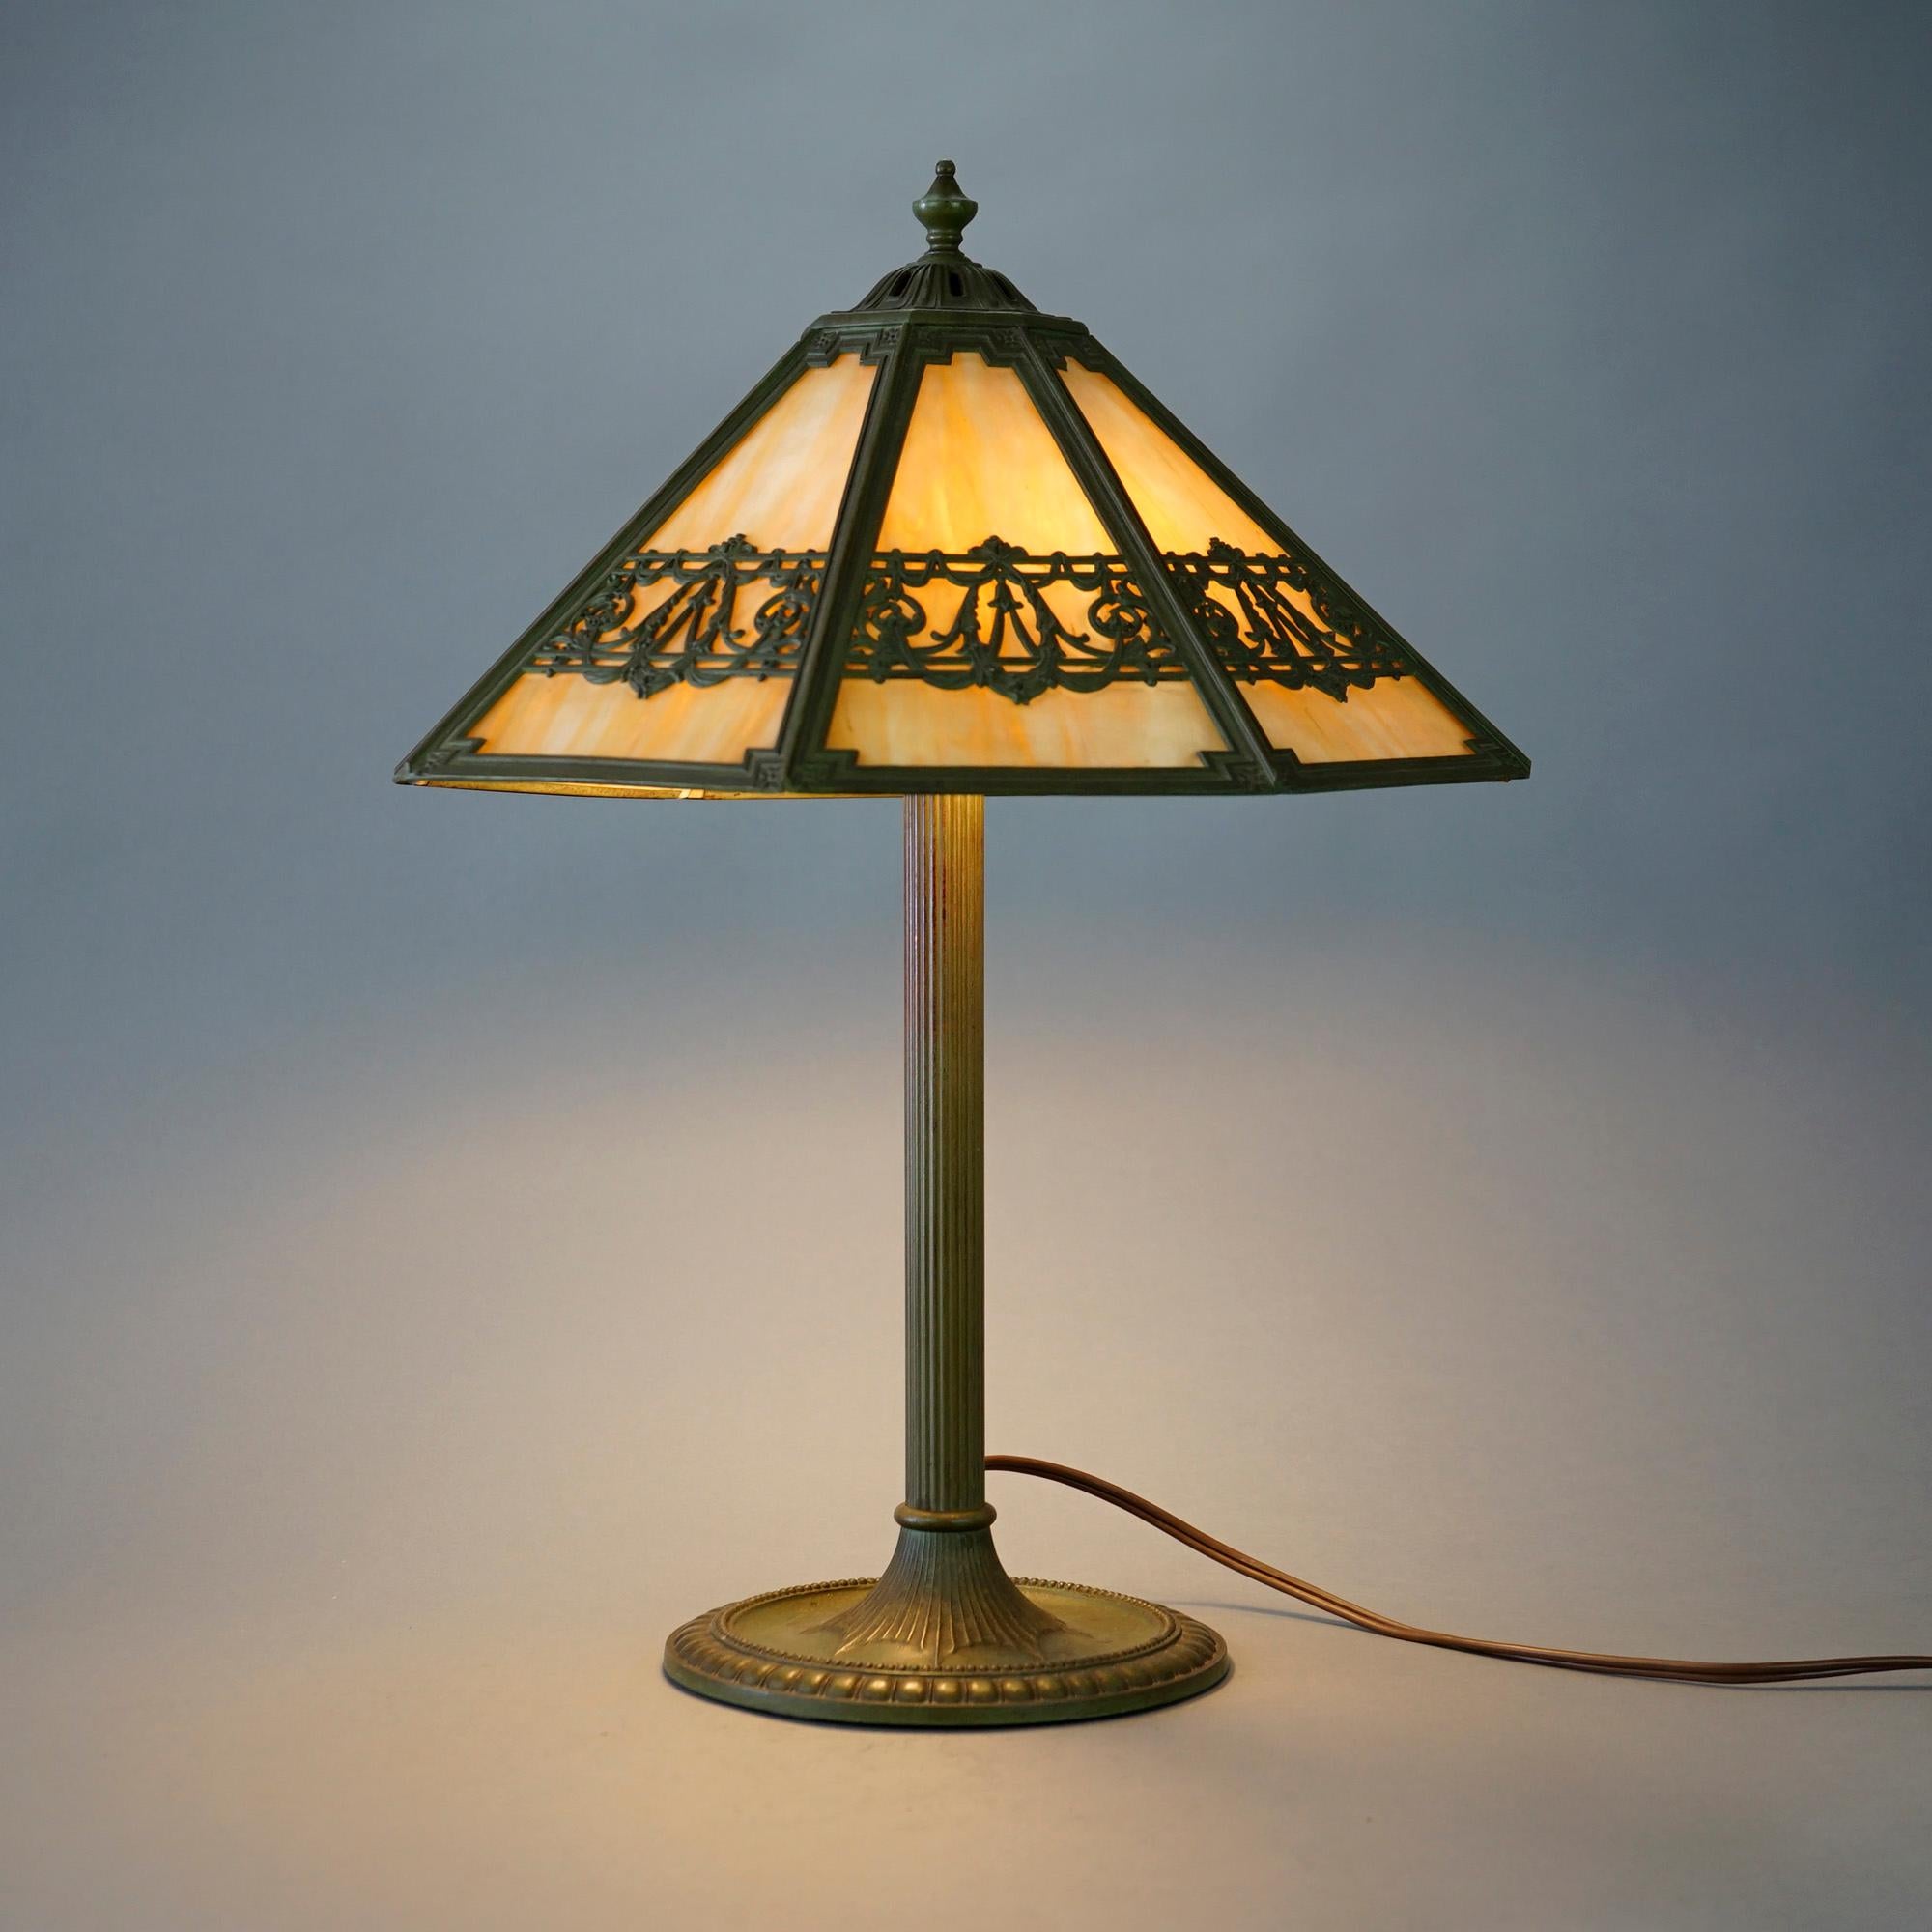 An antique Arts and Crafts table lamp by Bradley and Hubbard offers cast frame with garland and swag pattern housing slag glass panels over double socket cast base, maker signed, c1920

Measures- 21.75''H x 15''W x 15''D.